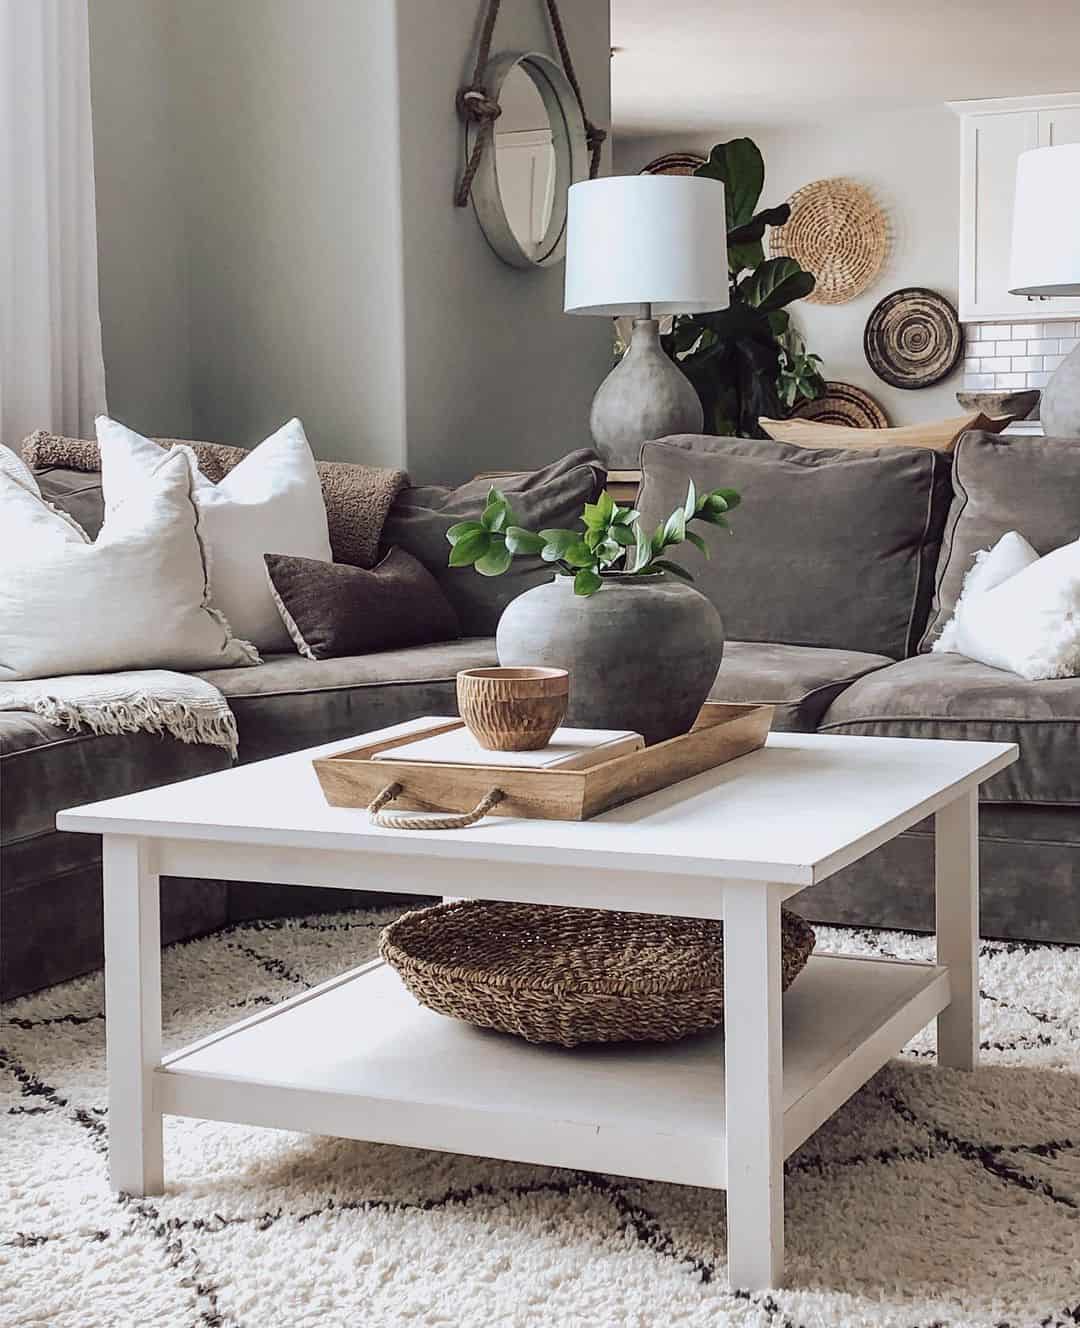 34 Easy Ways to Update Your Lounge with a Large Square Coffee Table